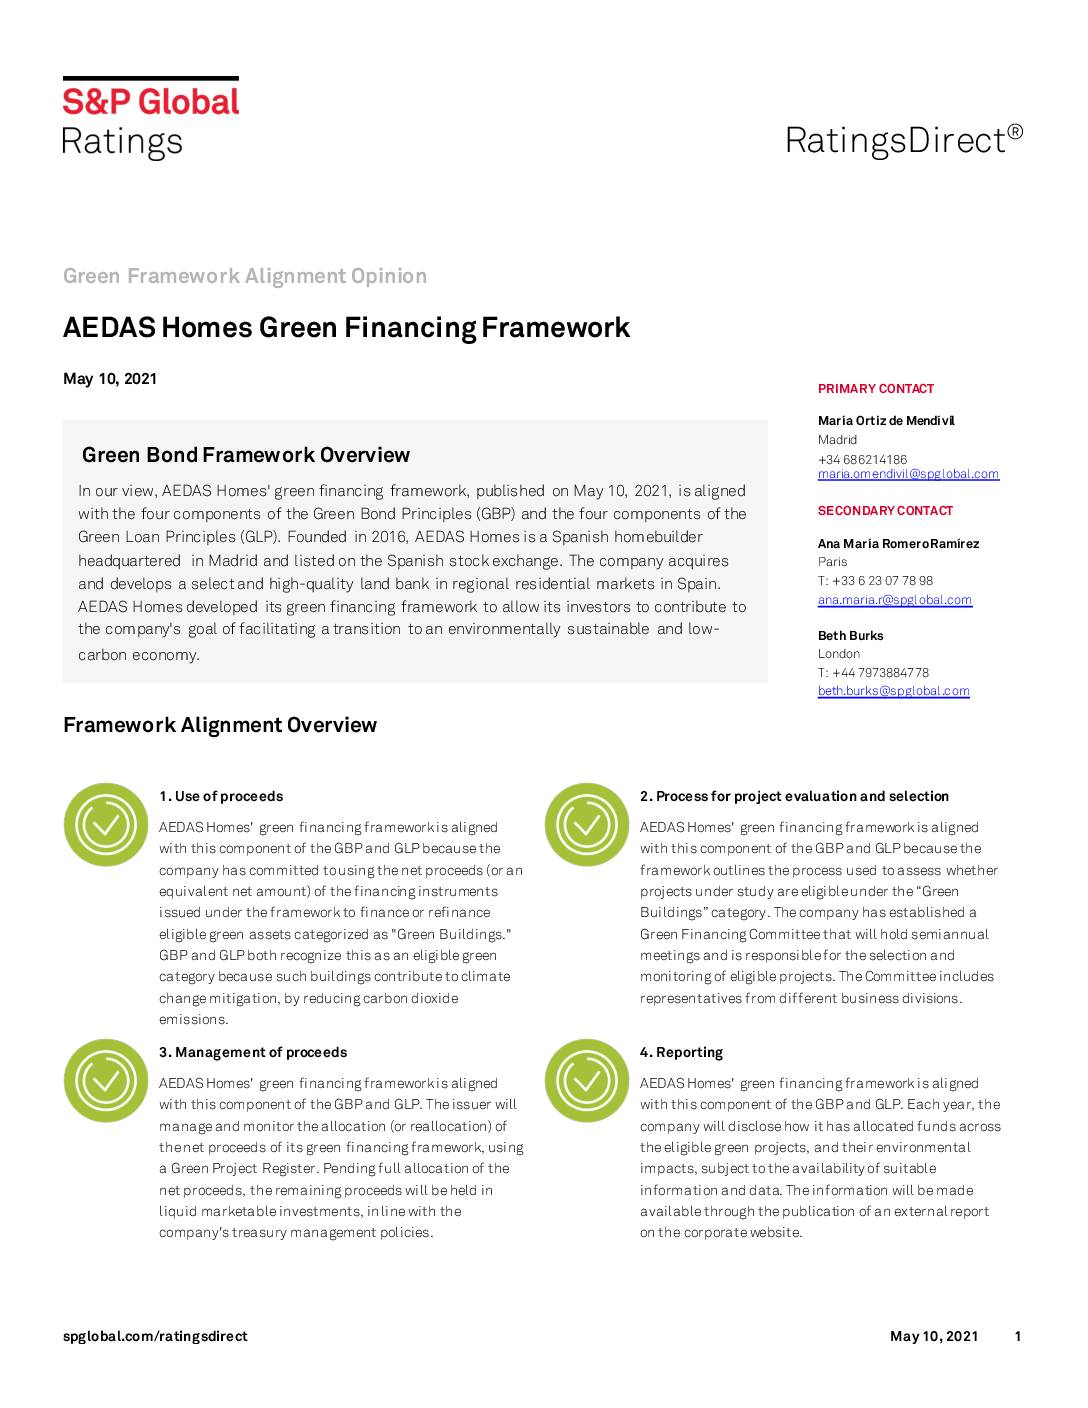 S&P Global Ratings Provides Full Alignment Opinion on AEDAS Homes Green Financing Framework